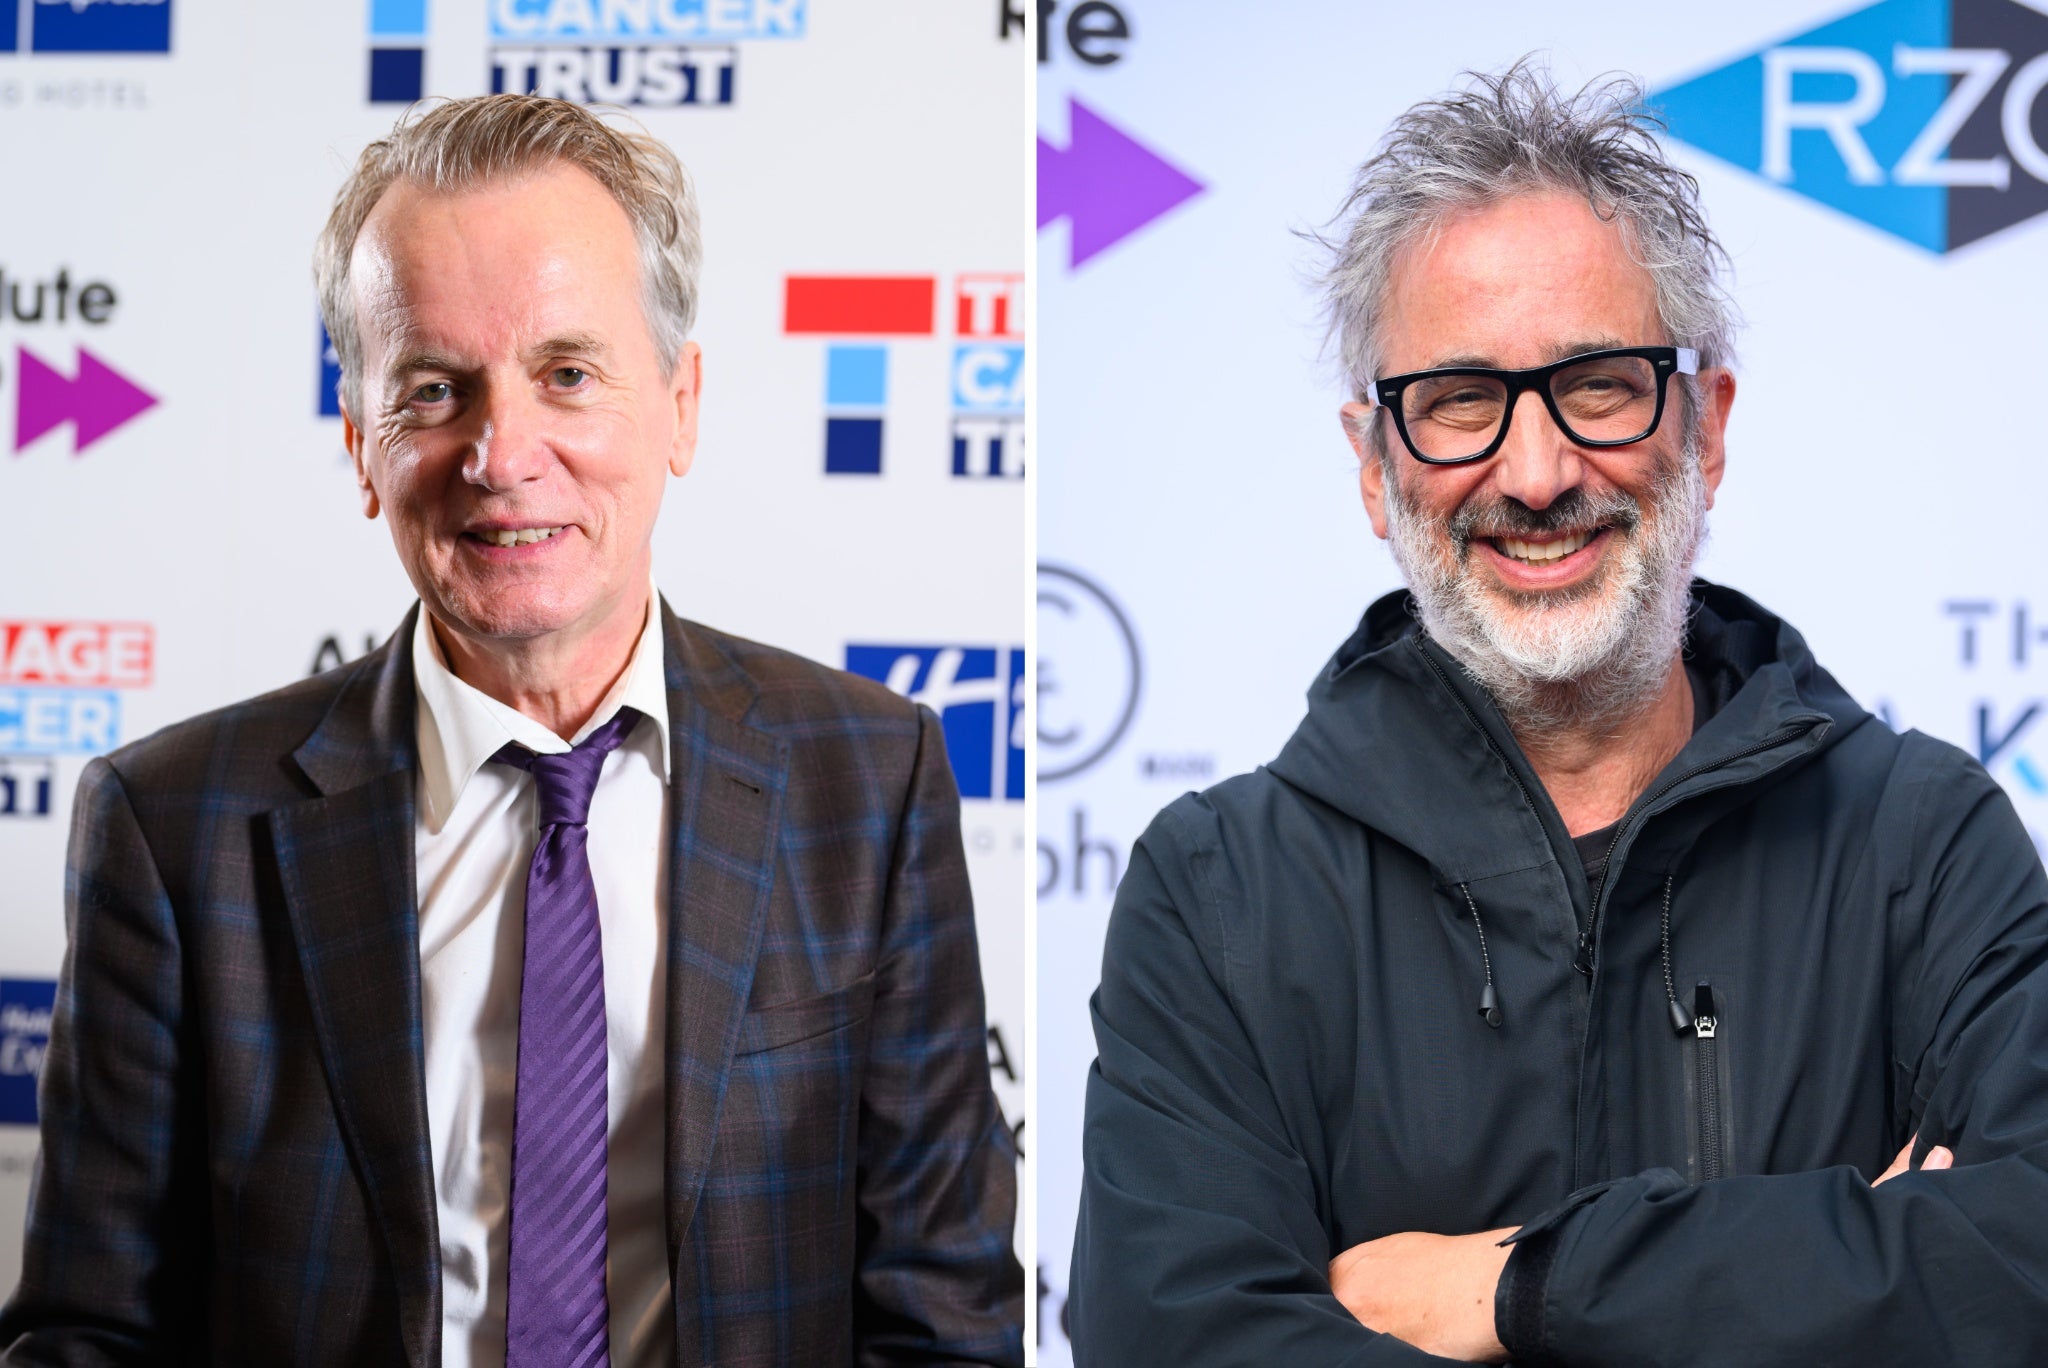 L-R: TV stars and comedians Frank Skinner and David Baddiel have been friends for years